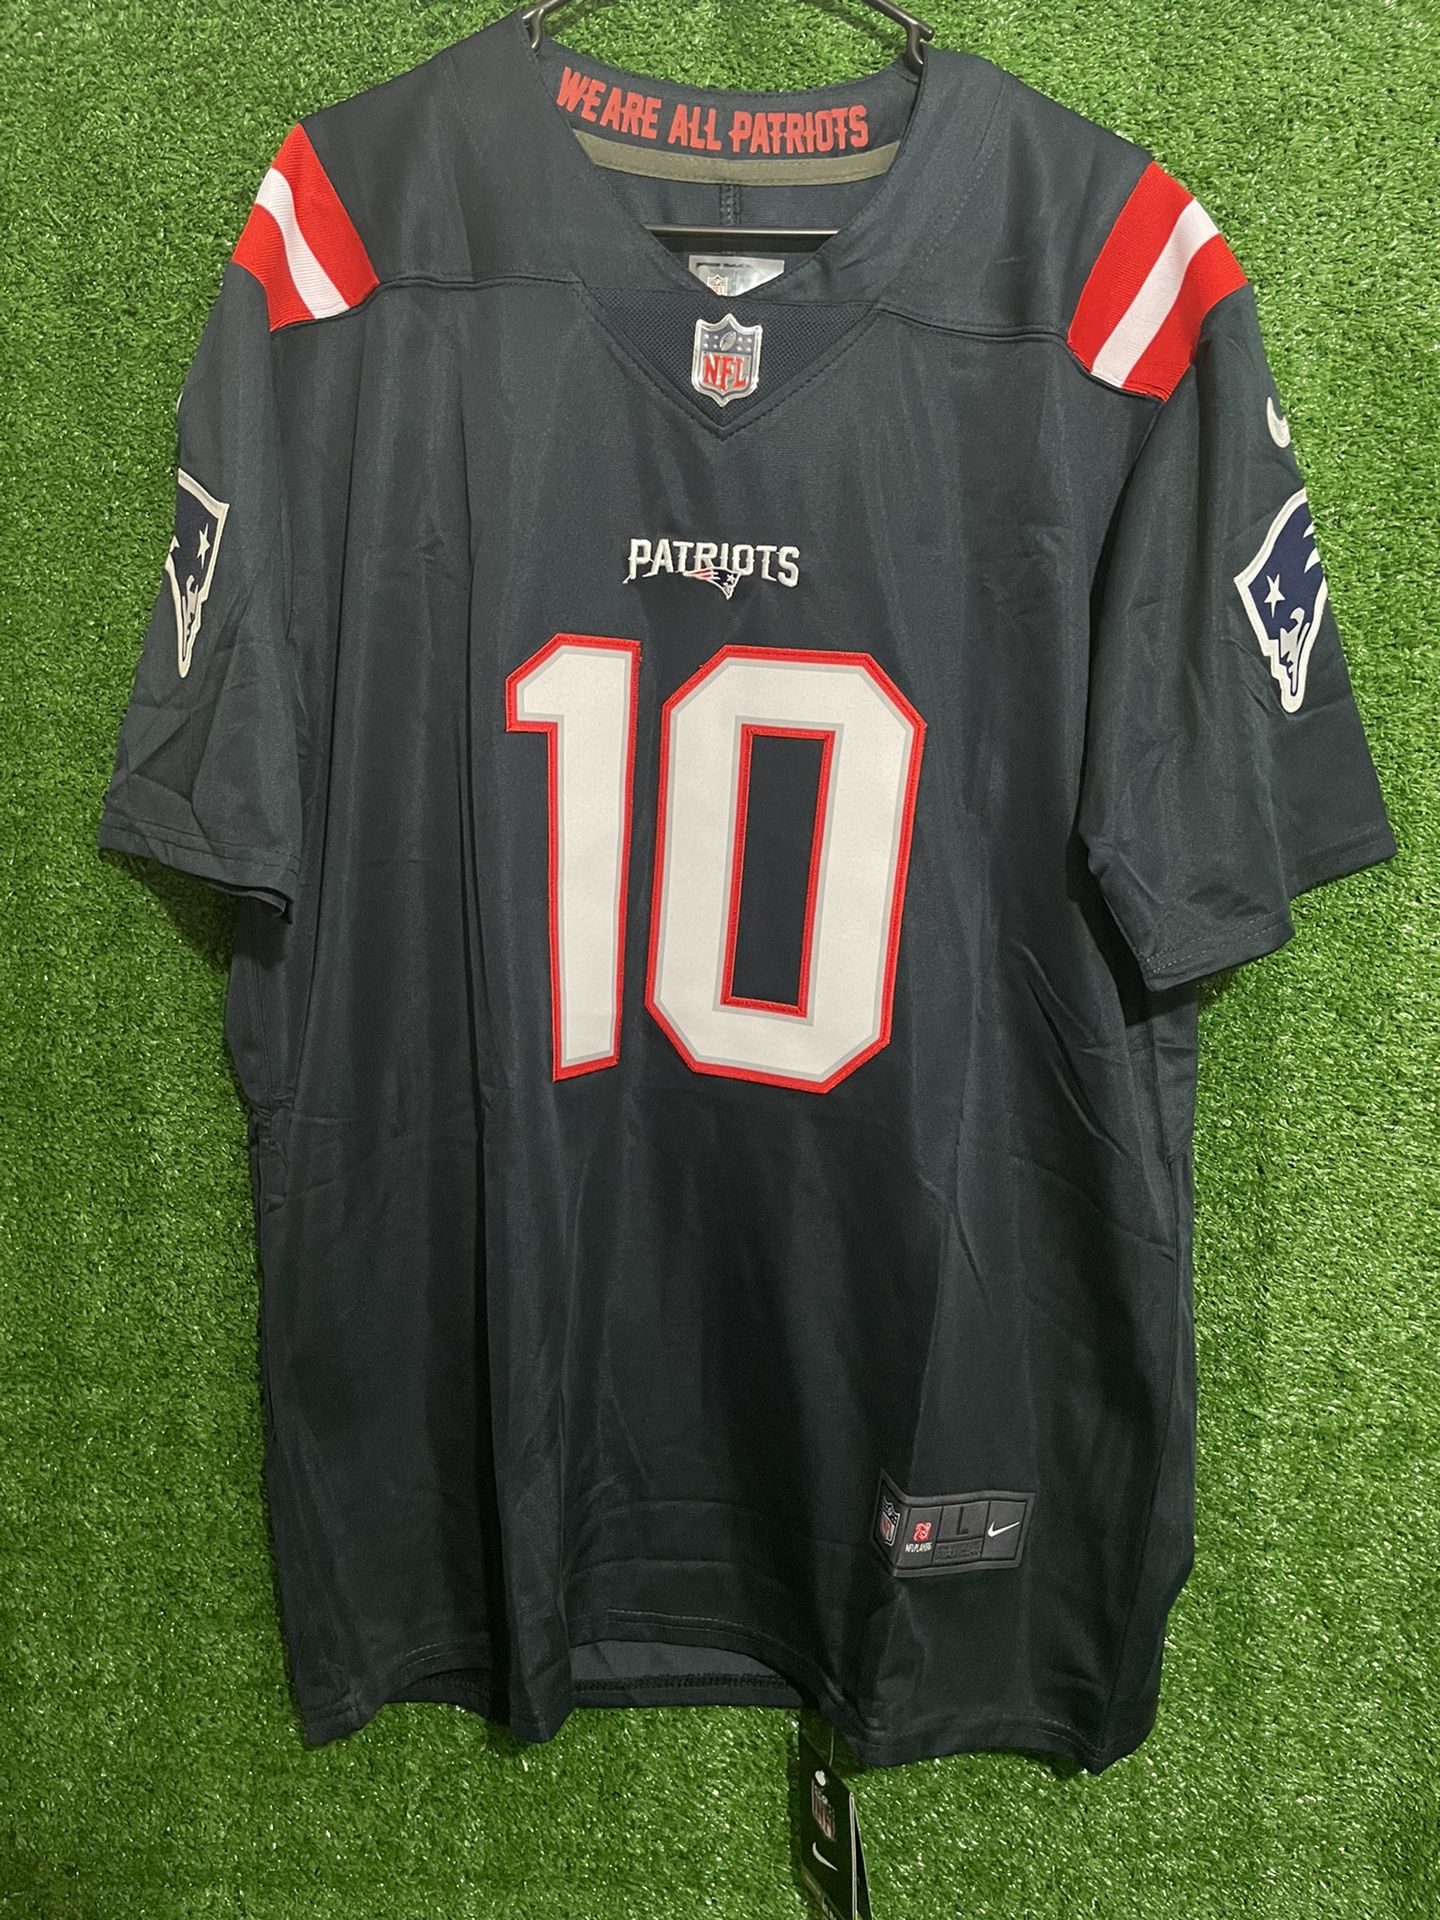 MAC JONES NEW ENGLAND PATRIOTS NIKE JERSEY BRAND NEW WITH TAGS SIZE LARGE